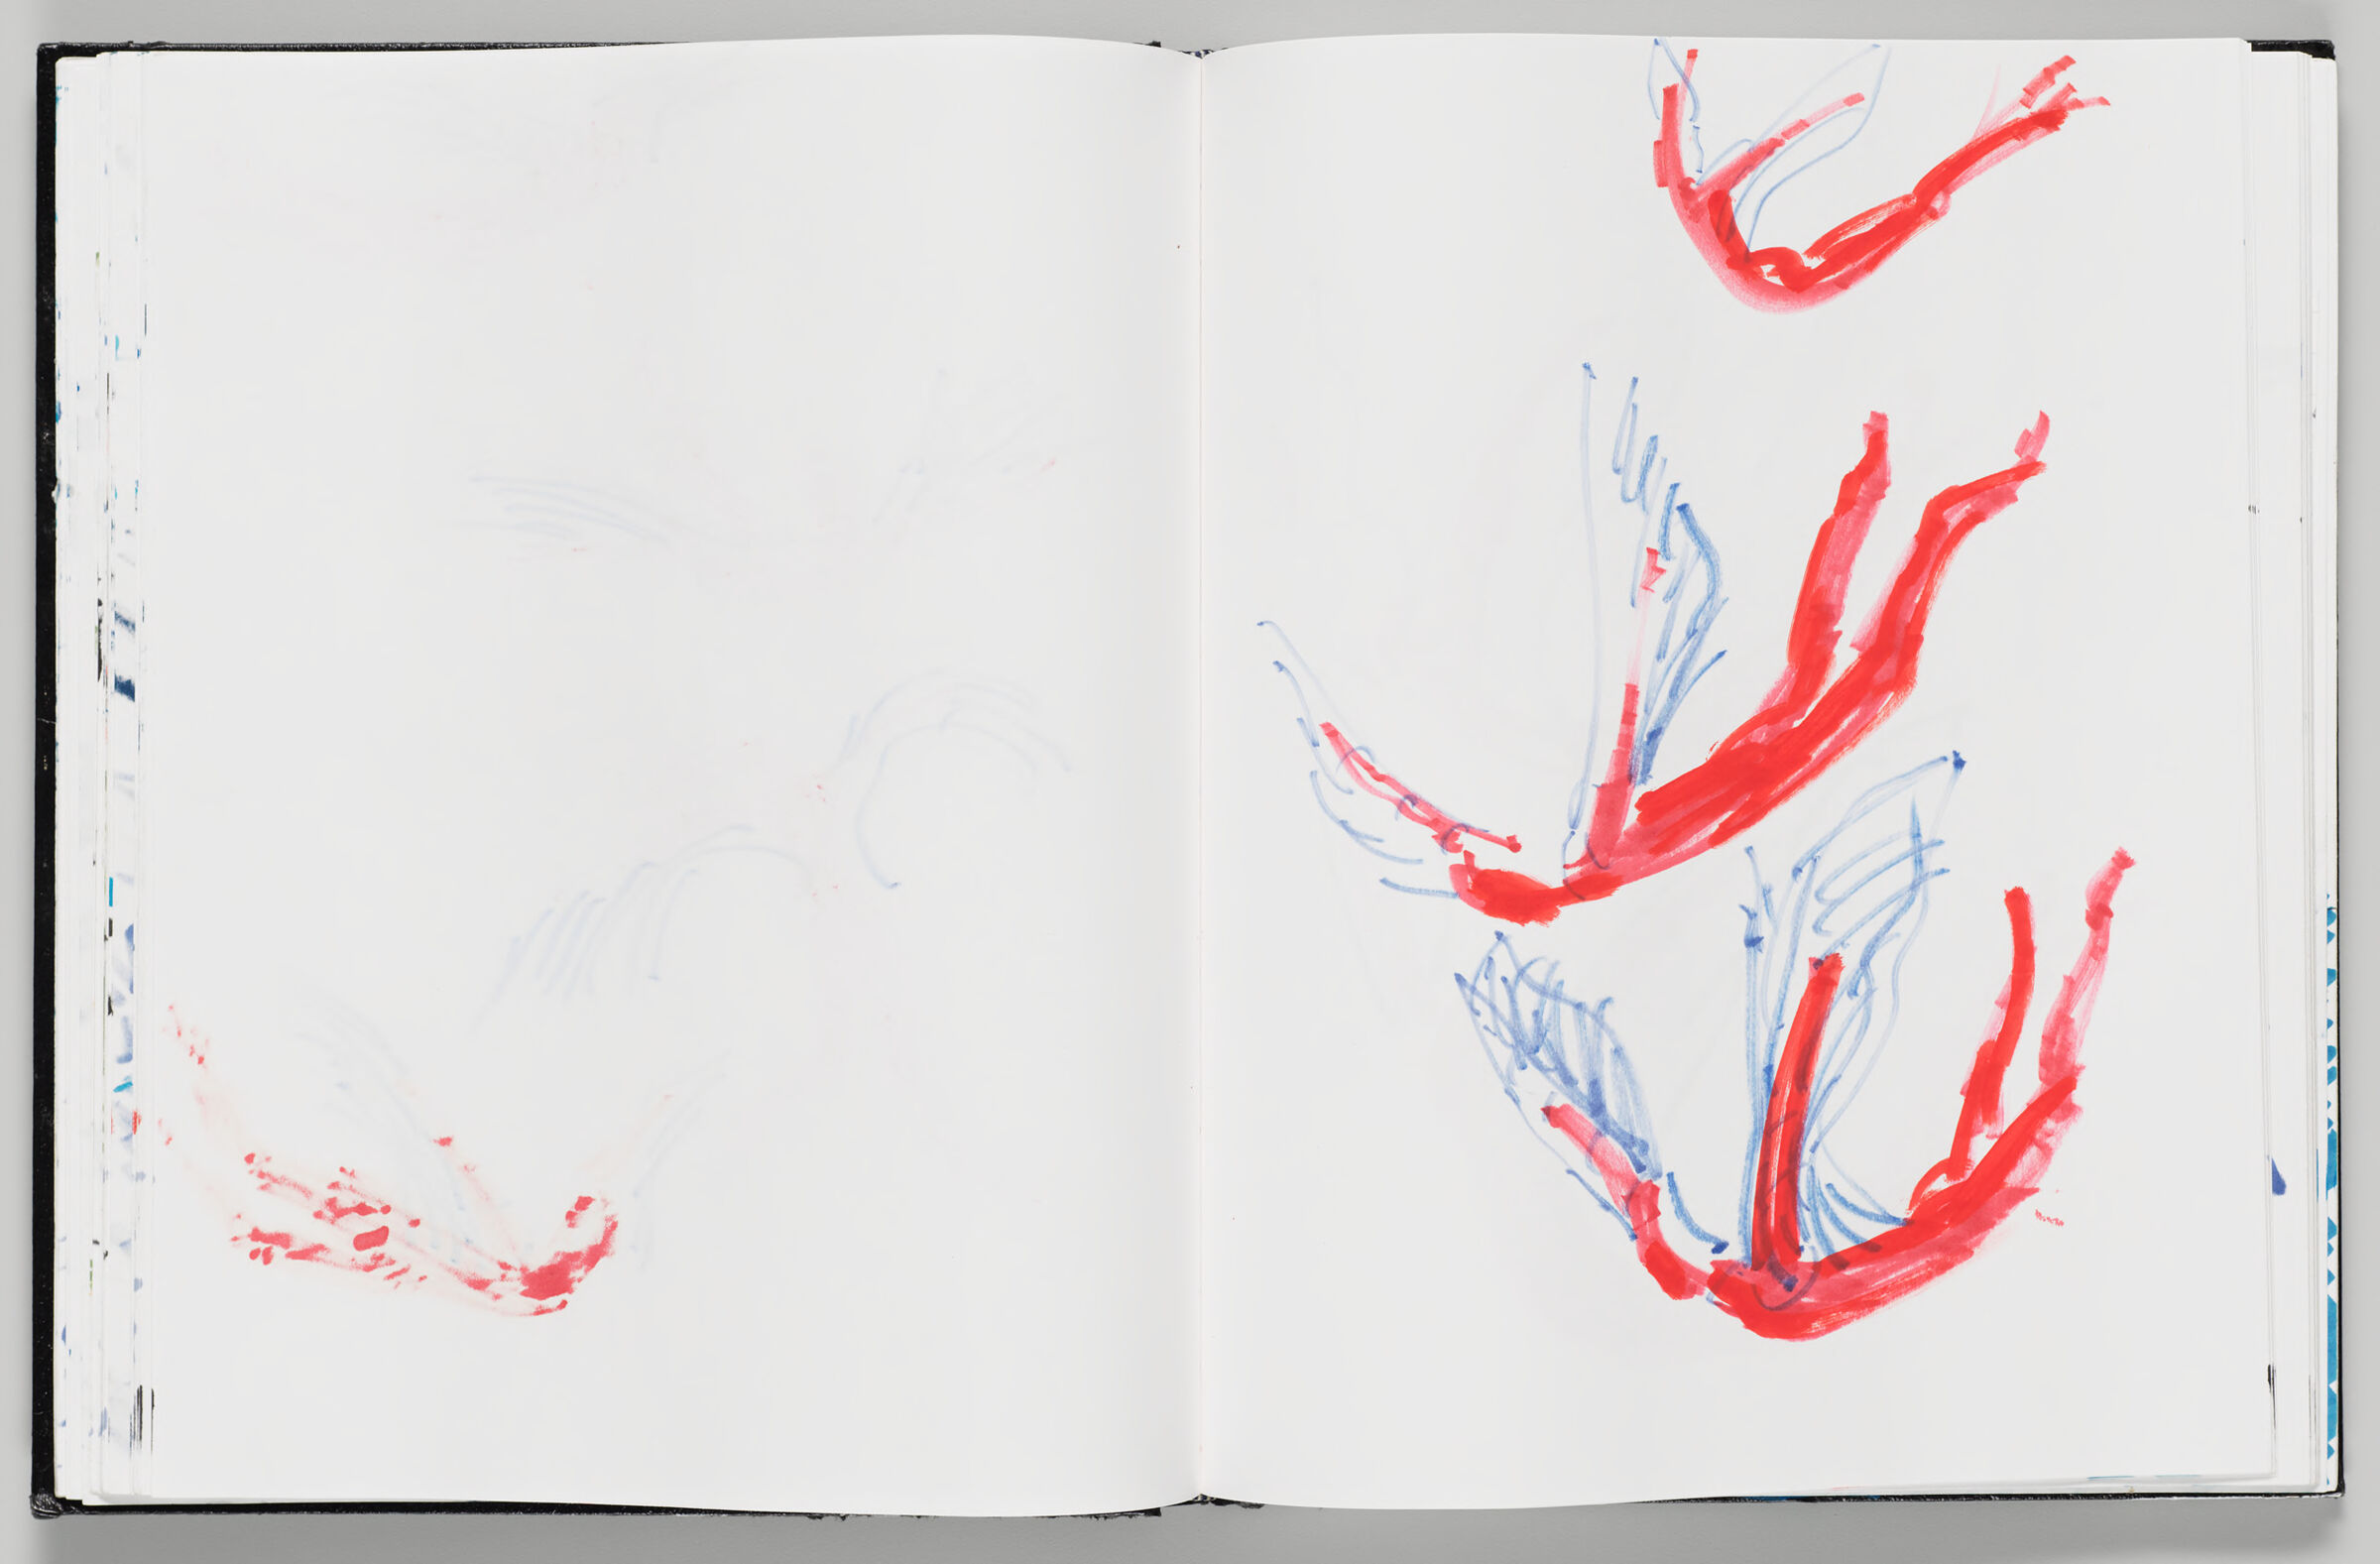 Untitled (Bleed-Through Of Previous Page, Left Page); Untitled (Flying Figures, Right Page)